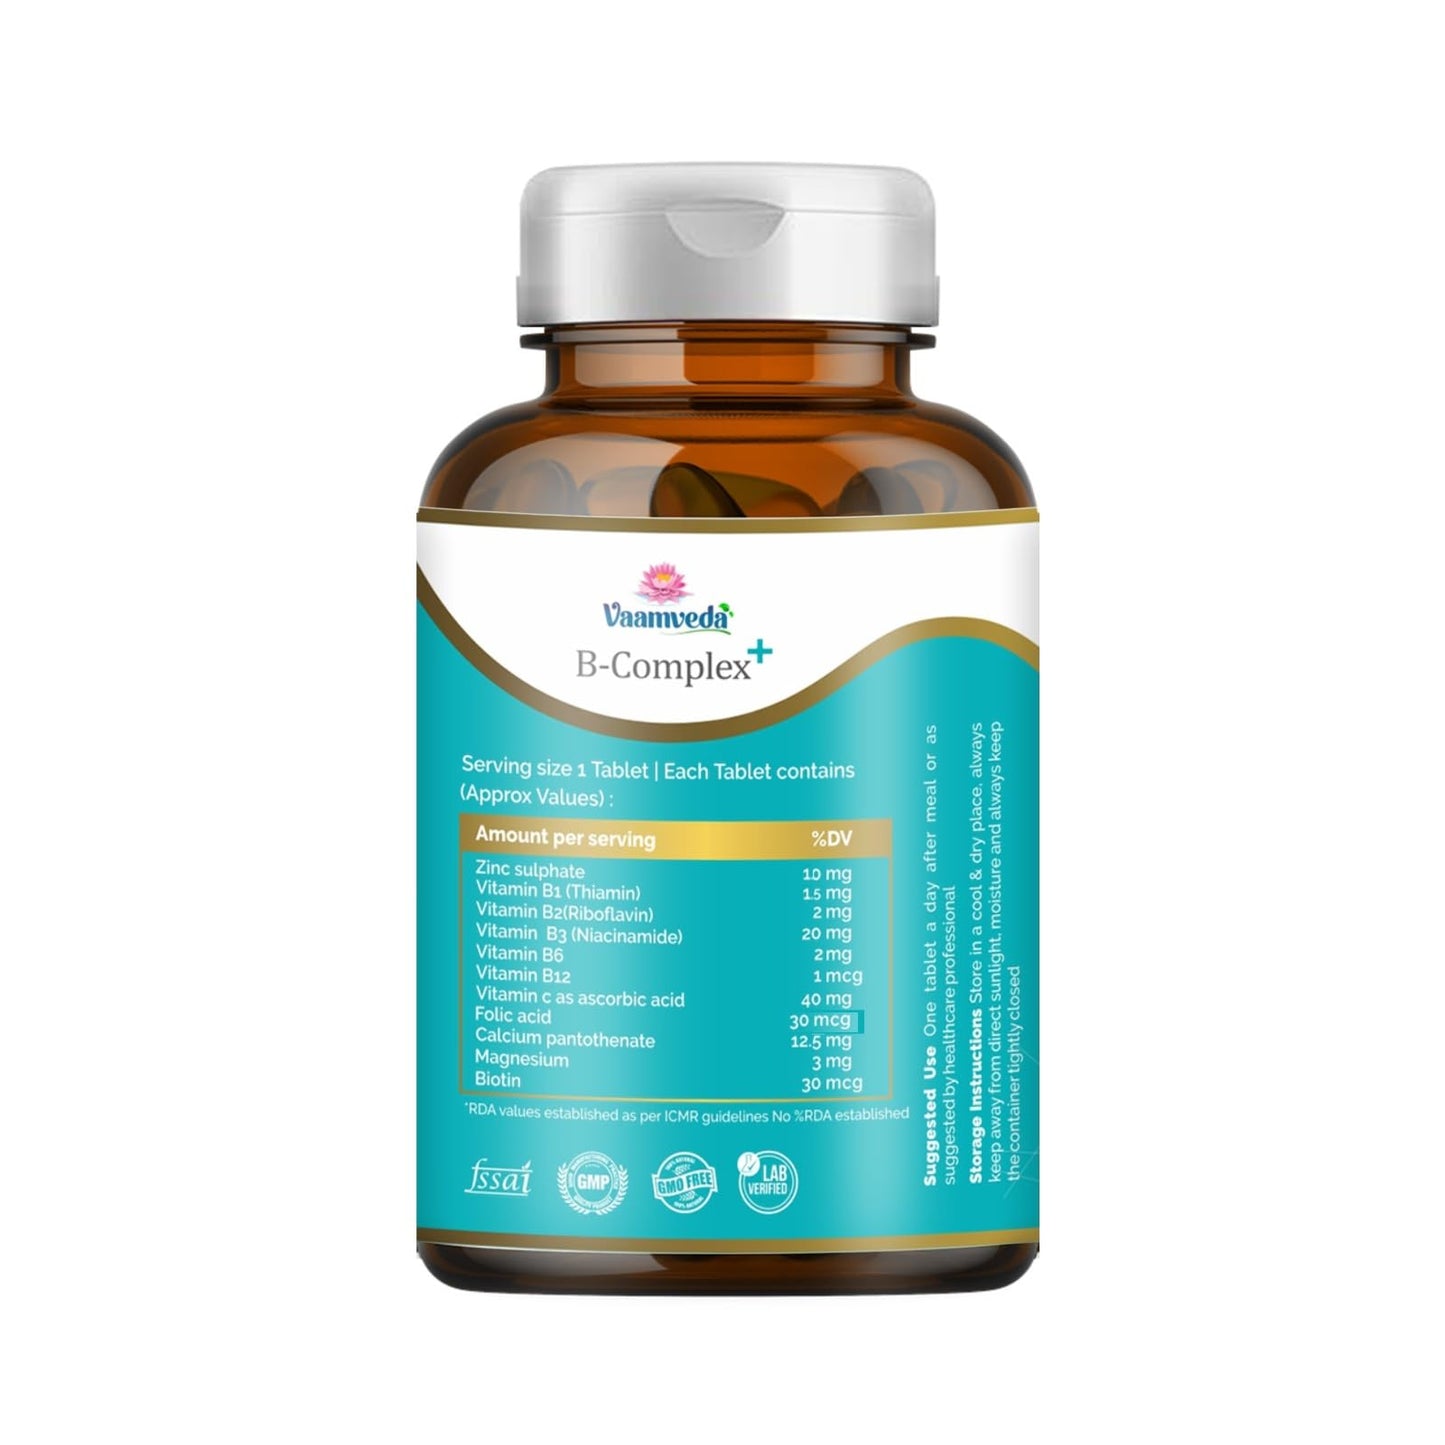 Vaamveda Vitamin B Complex Supplements Tablets, Helps Fight Daily Stress and Fatigue - 60 Vegan Capsules